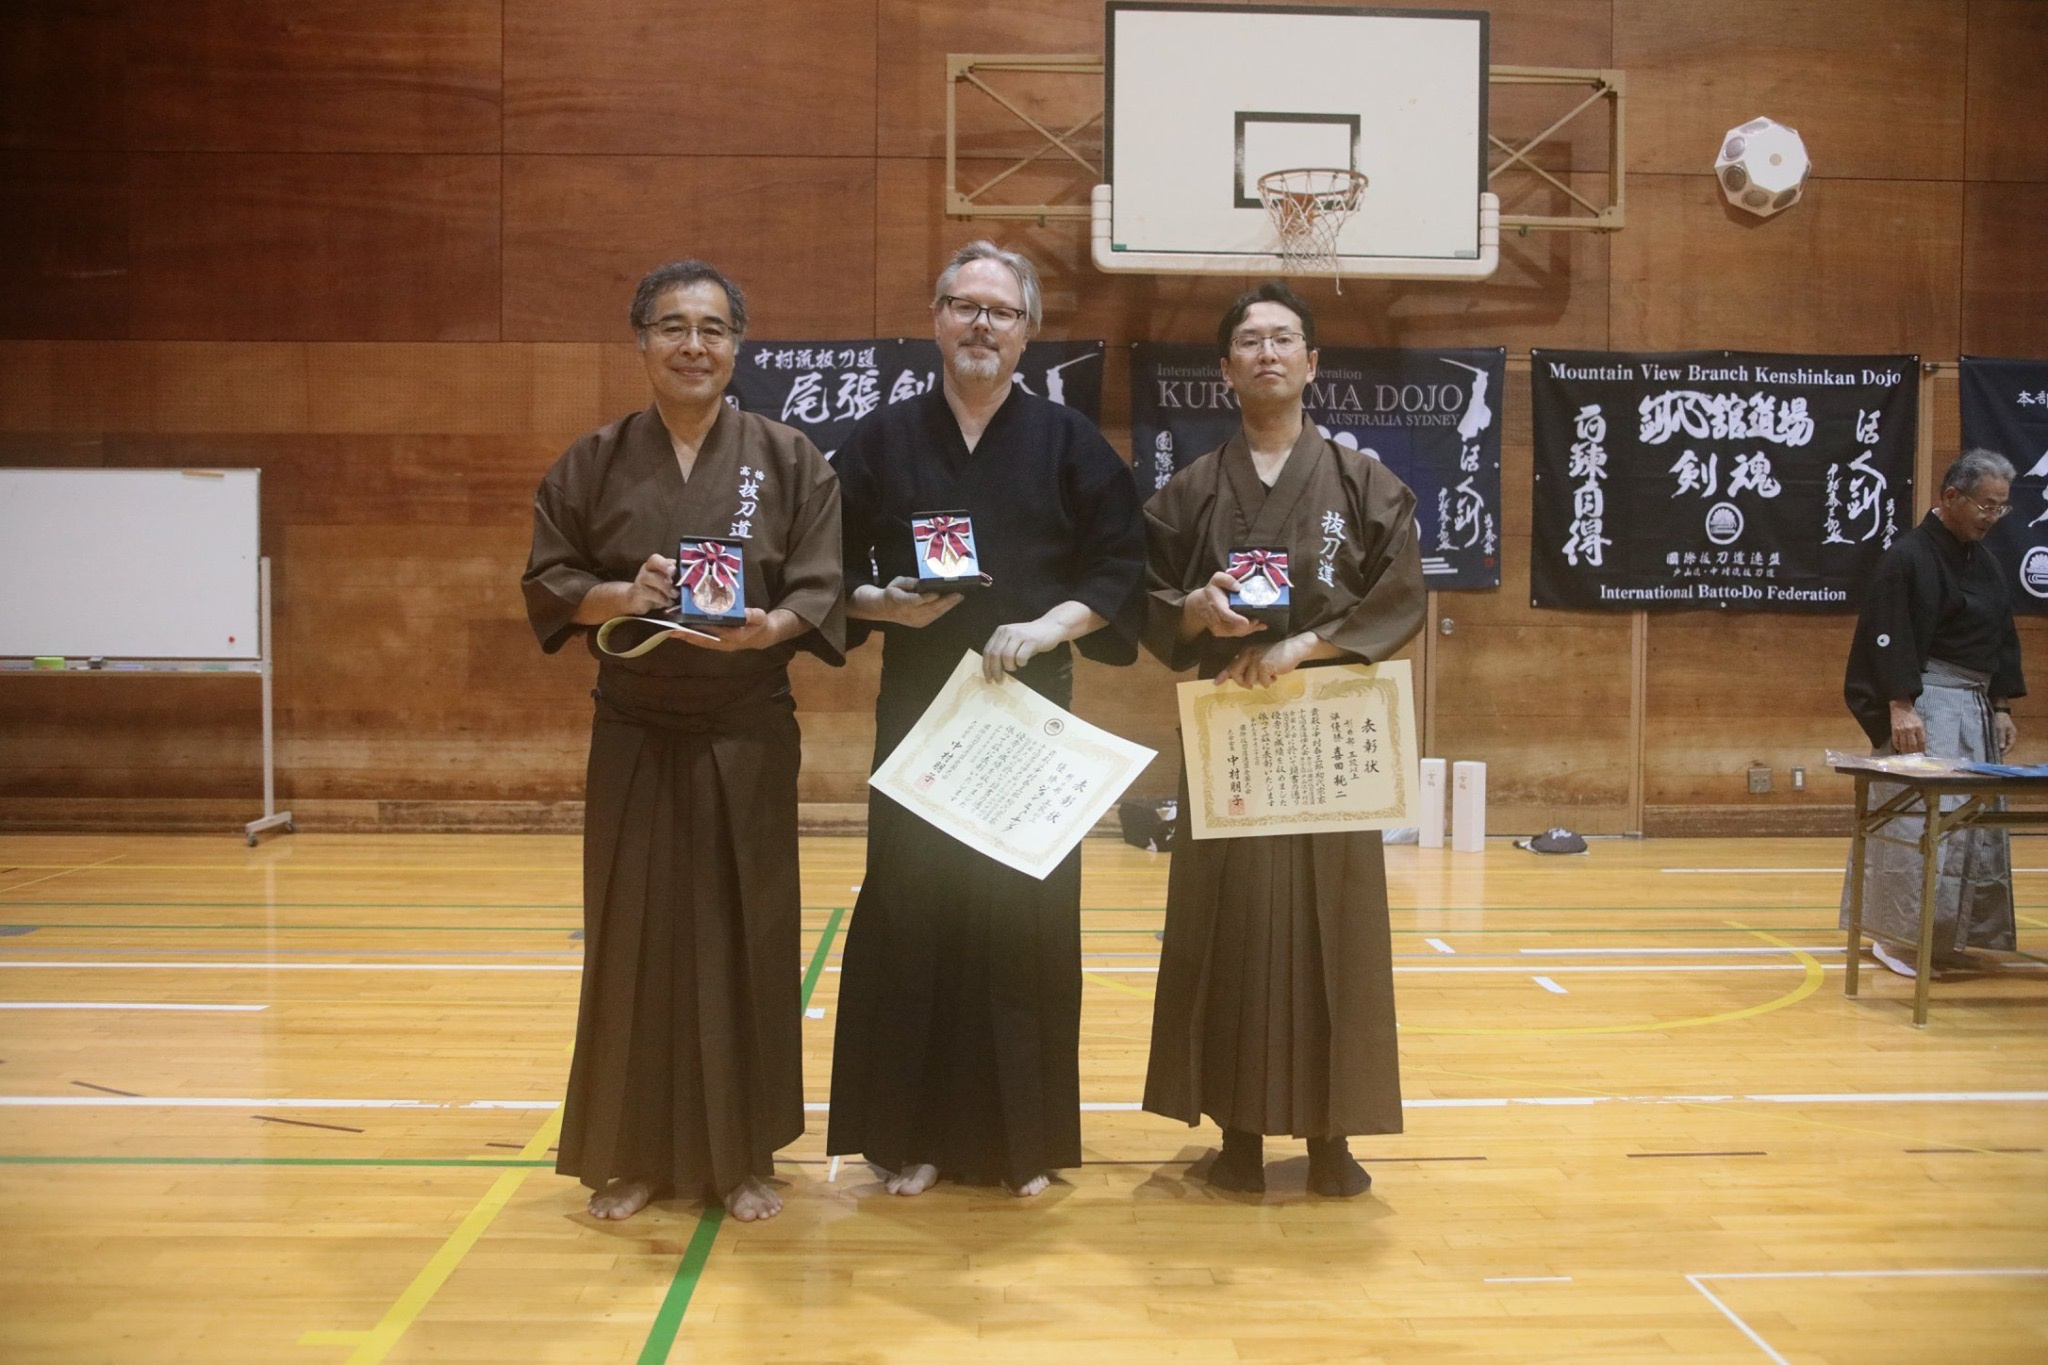 Tex with 1st place in Godan and above kata. You can see our new Dojo flag in the background - Nice!